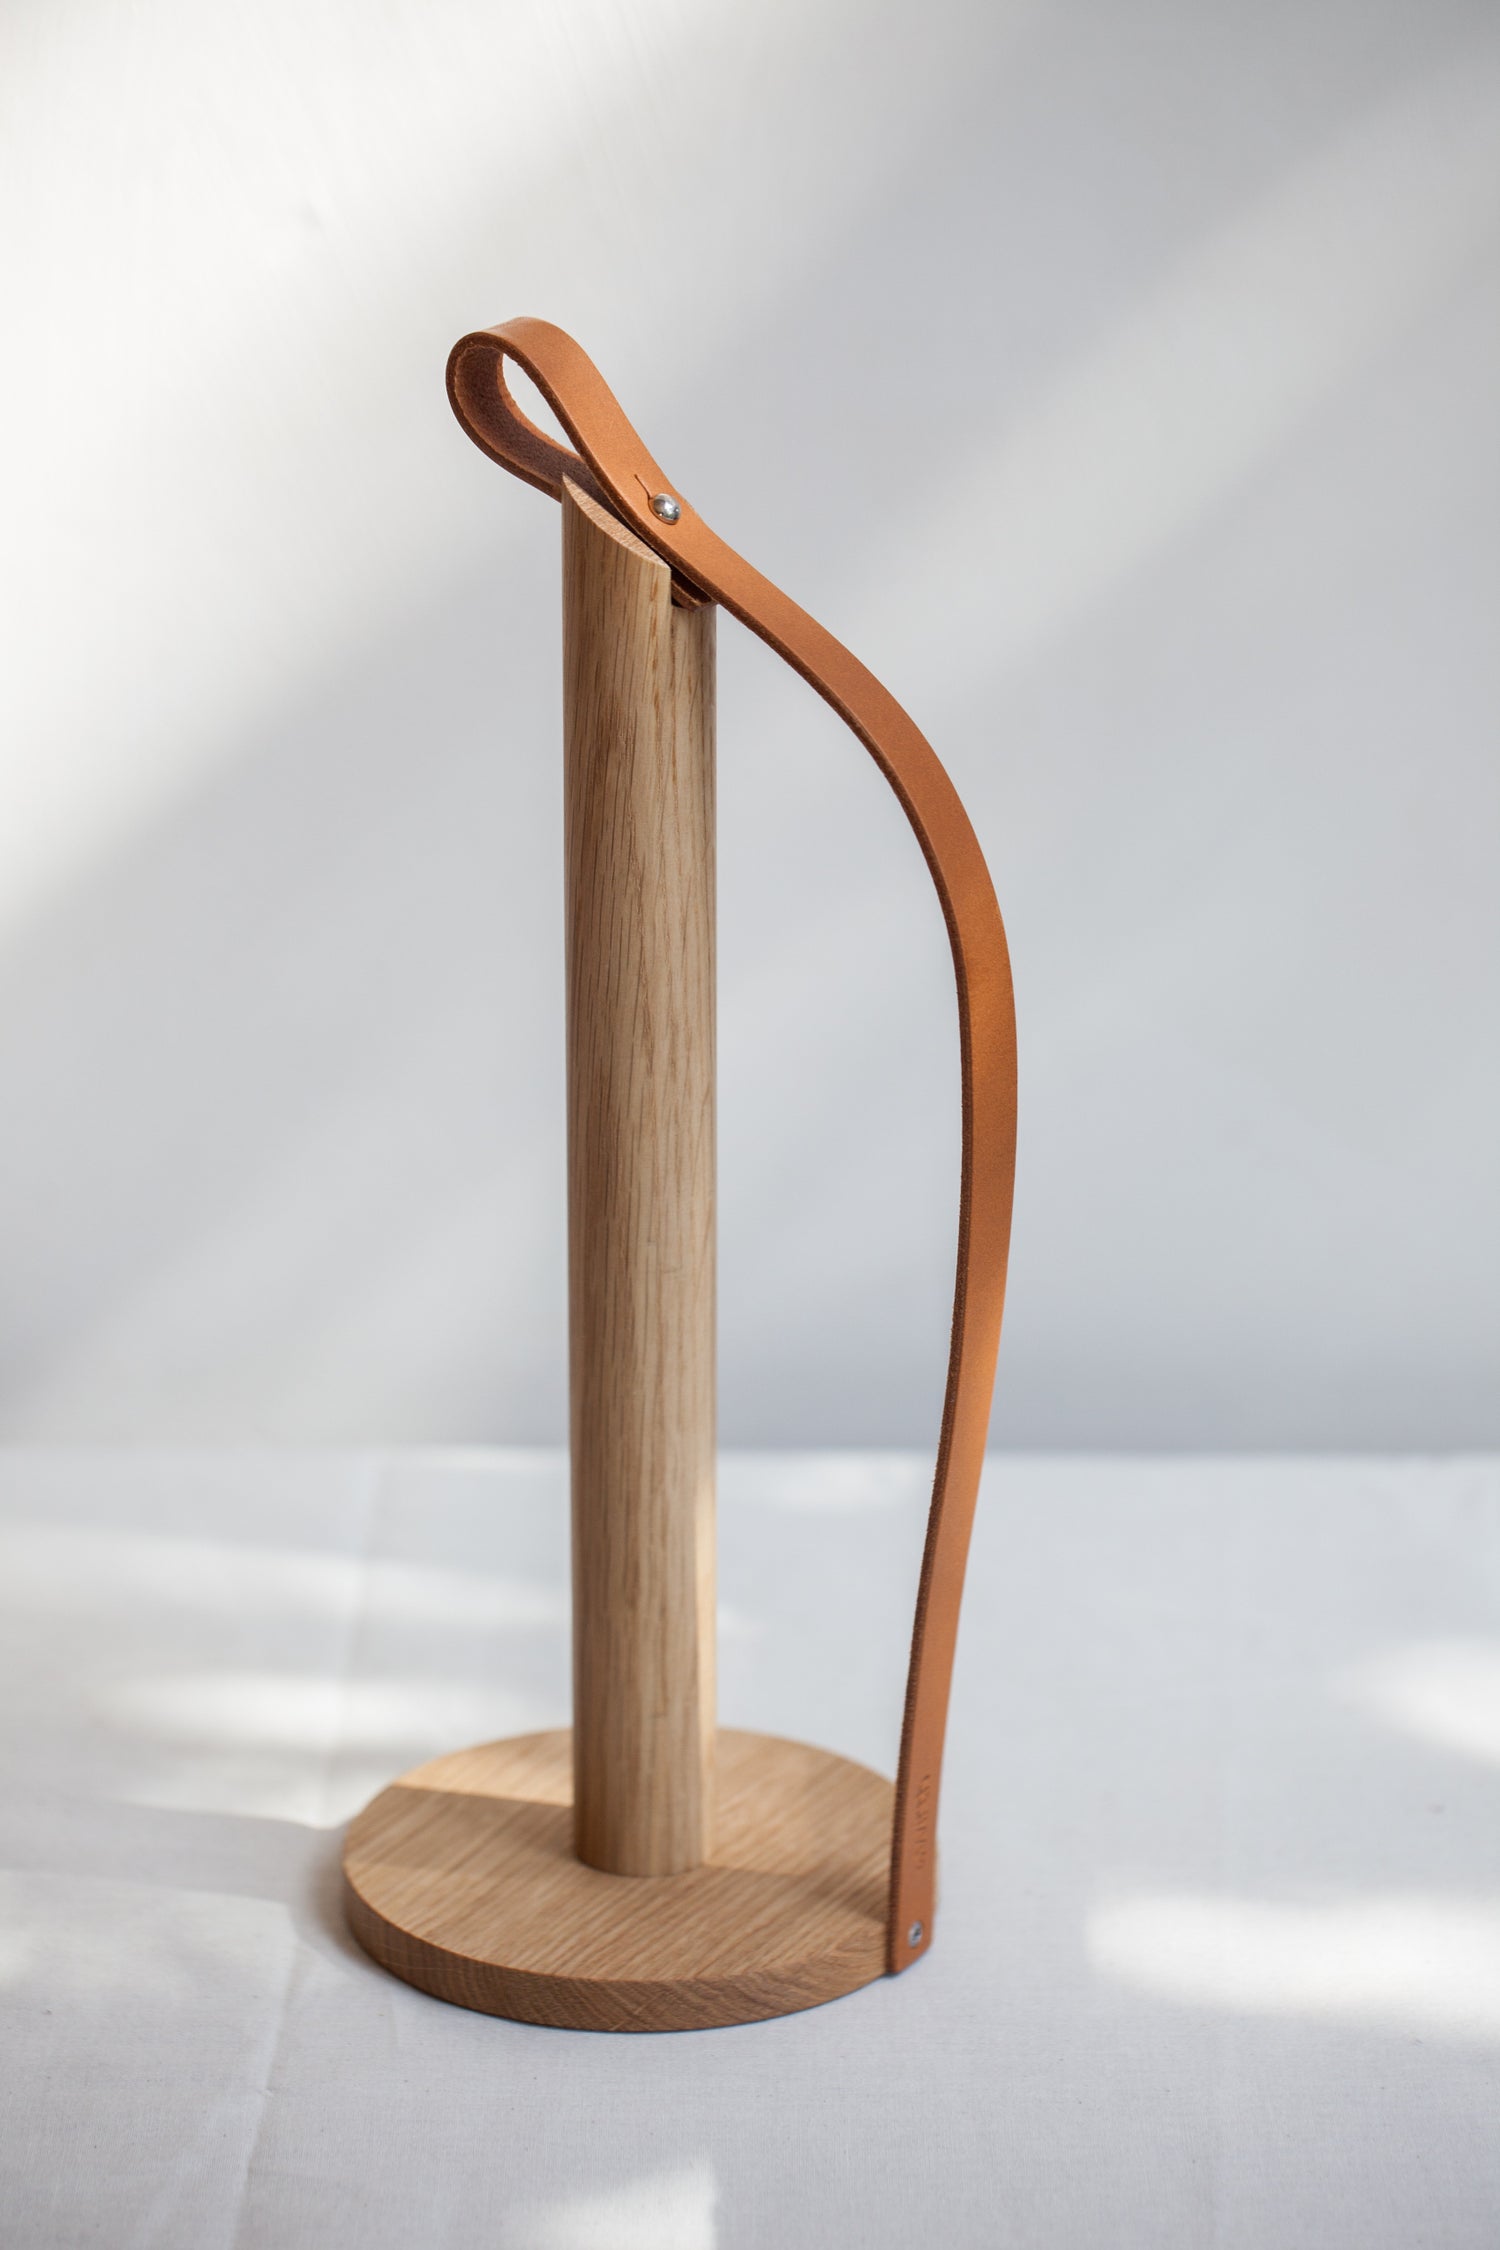 Paper-Towel Holder made from oiled oak with leather strap by EKTA Living.